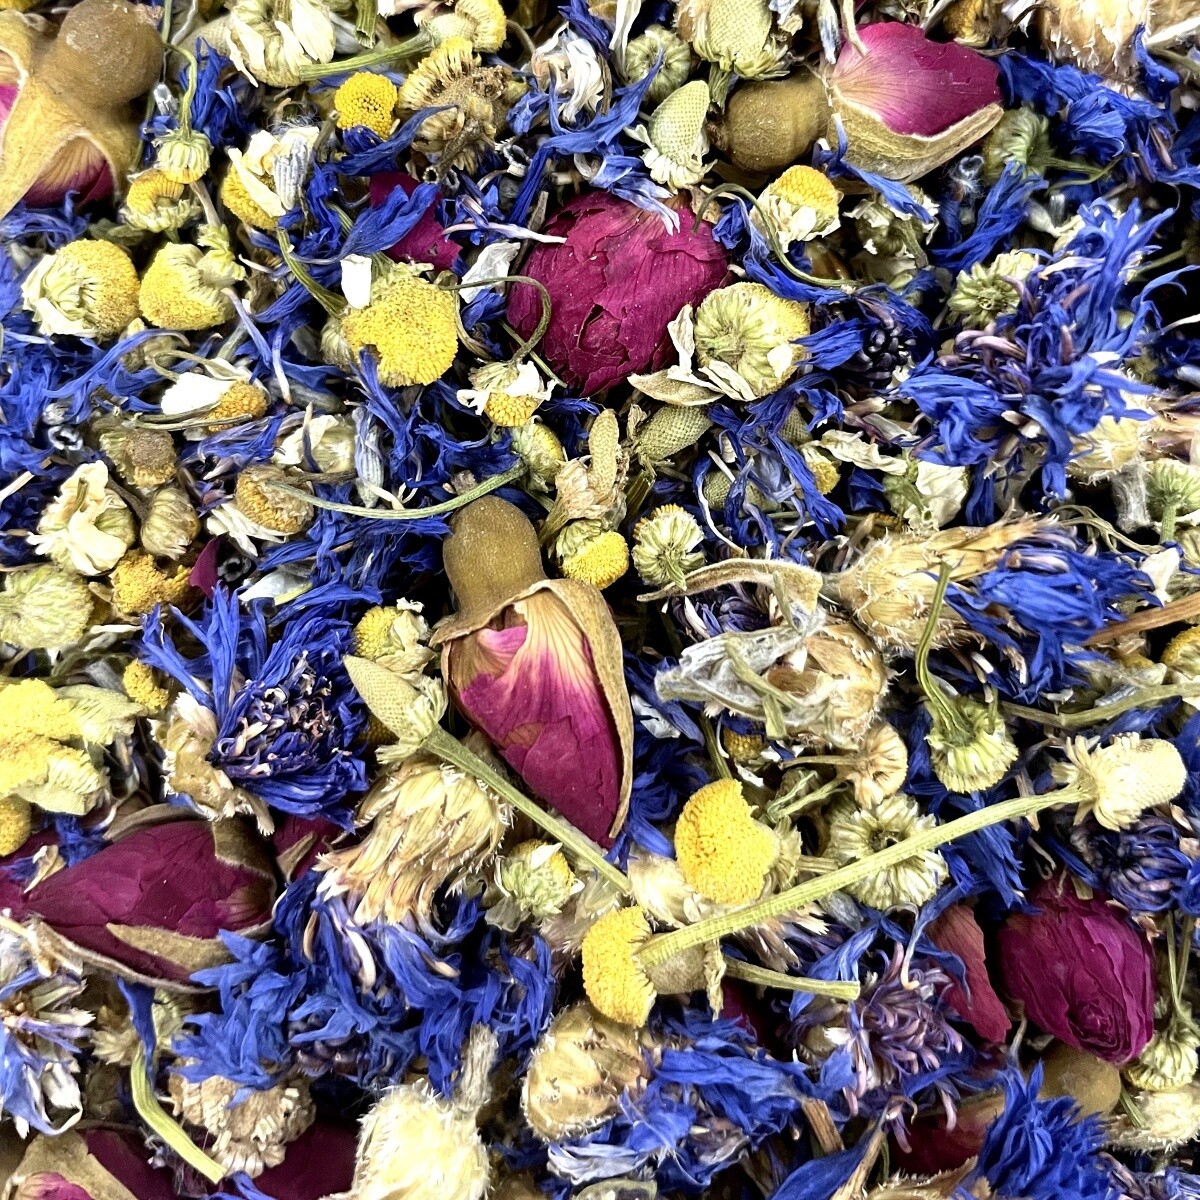 Flower Garden! Combination 1 oz - Ingredients: Cornflowers, Rose Buds, Chamomile, Lavender, Rosemary. Introducing Dried flowers to add to dry blends, fresh food, and toys! by China Prairie